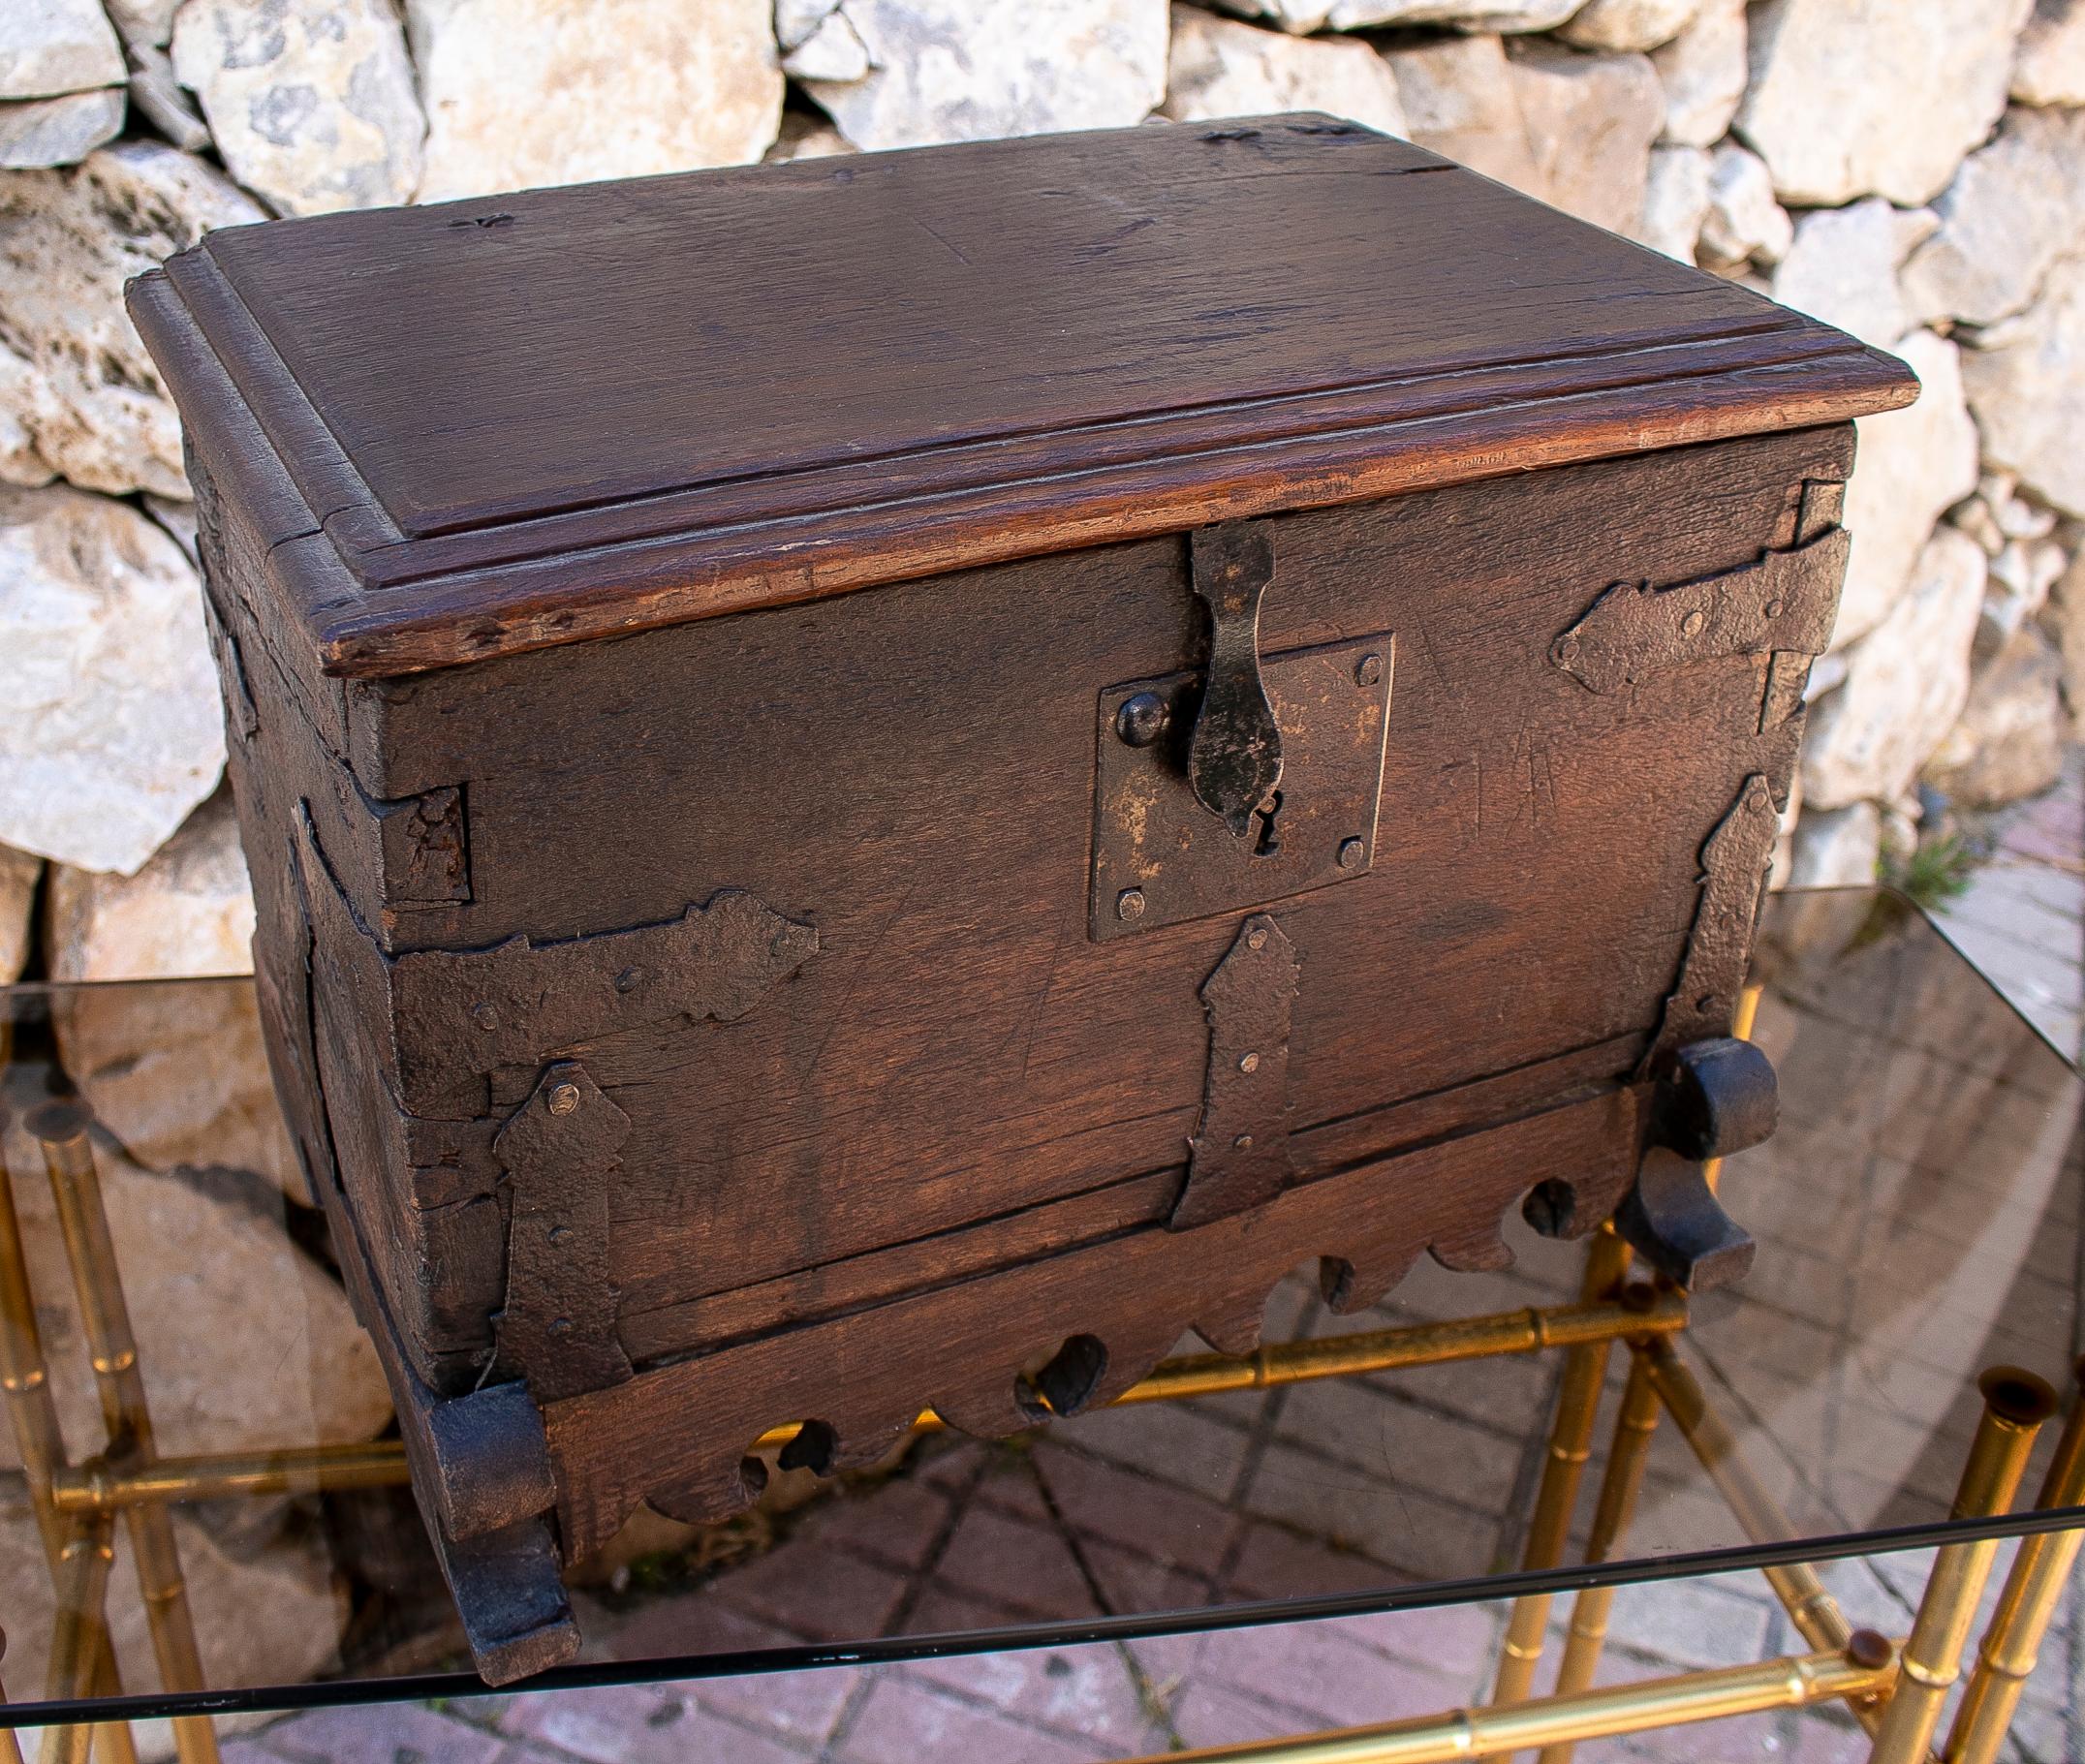 Antique 18th century Spanish wooden trunk with iron hardware.